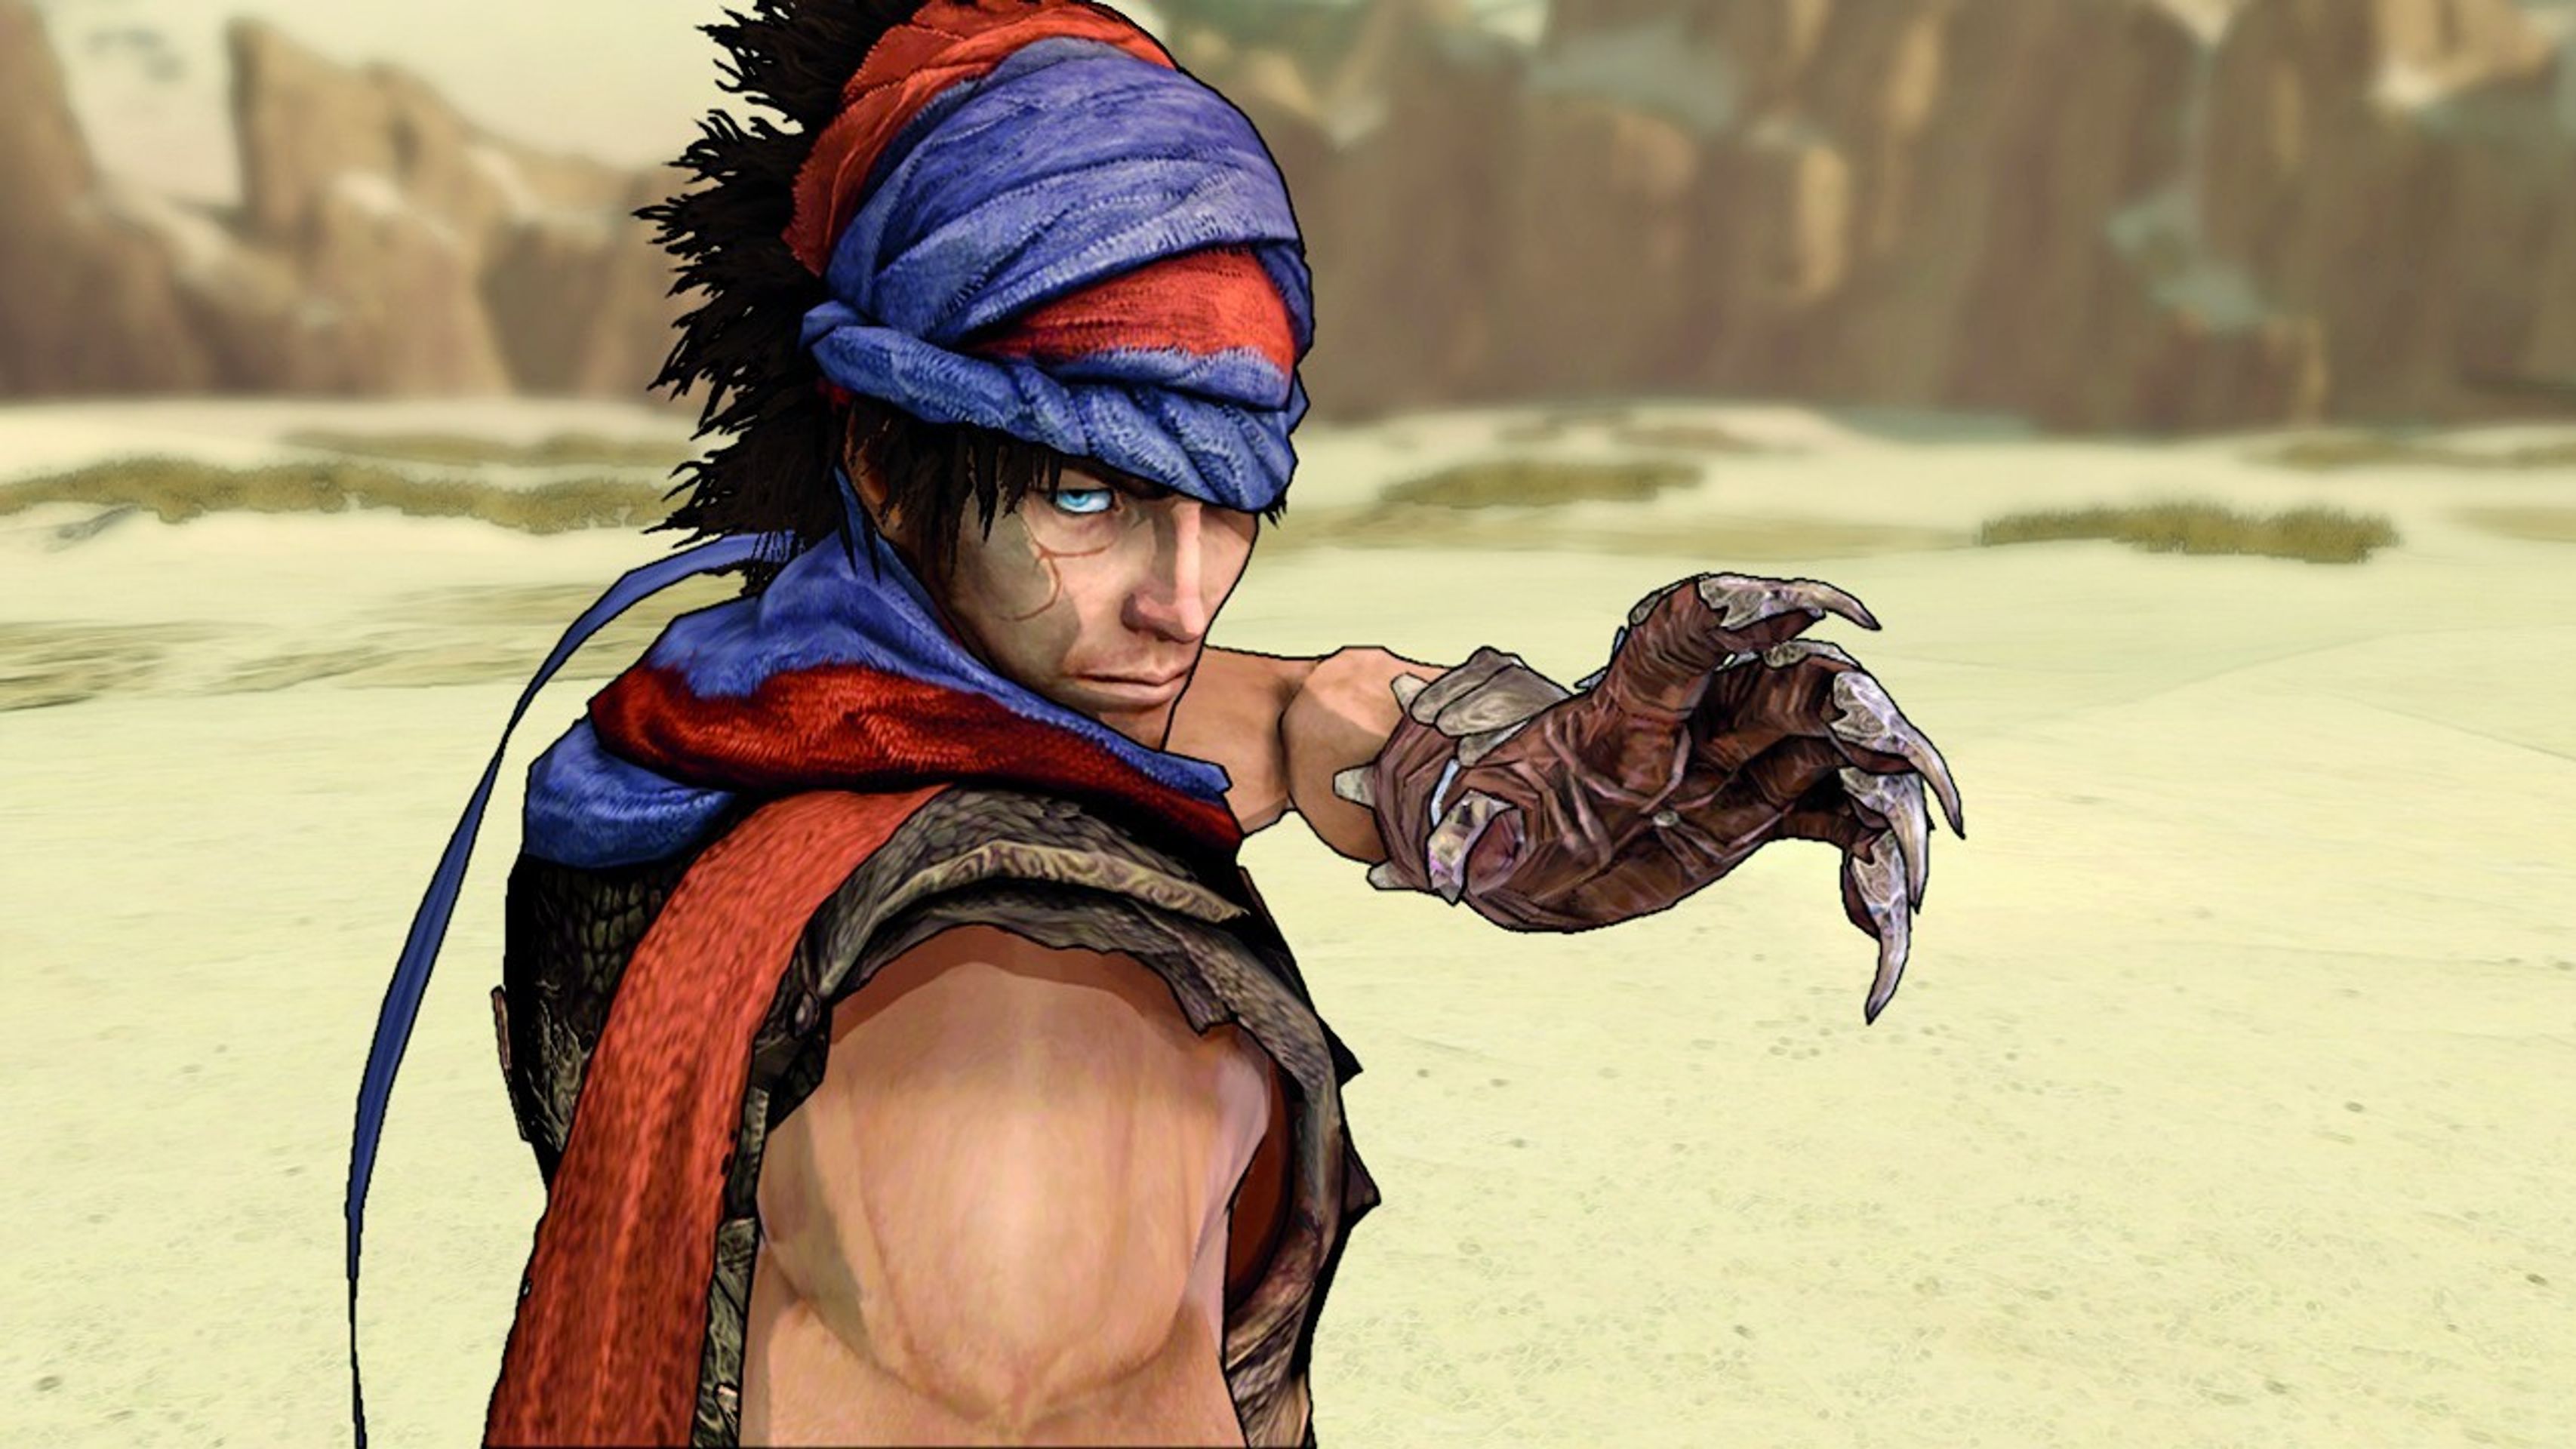 Prince of Persia - Prince of Persia galerie (4/7)